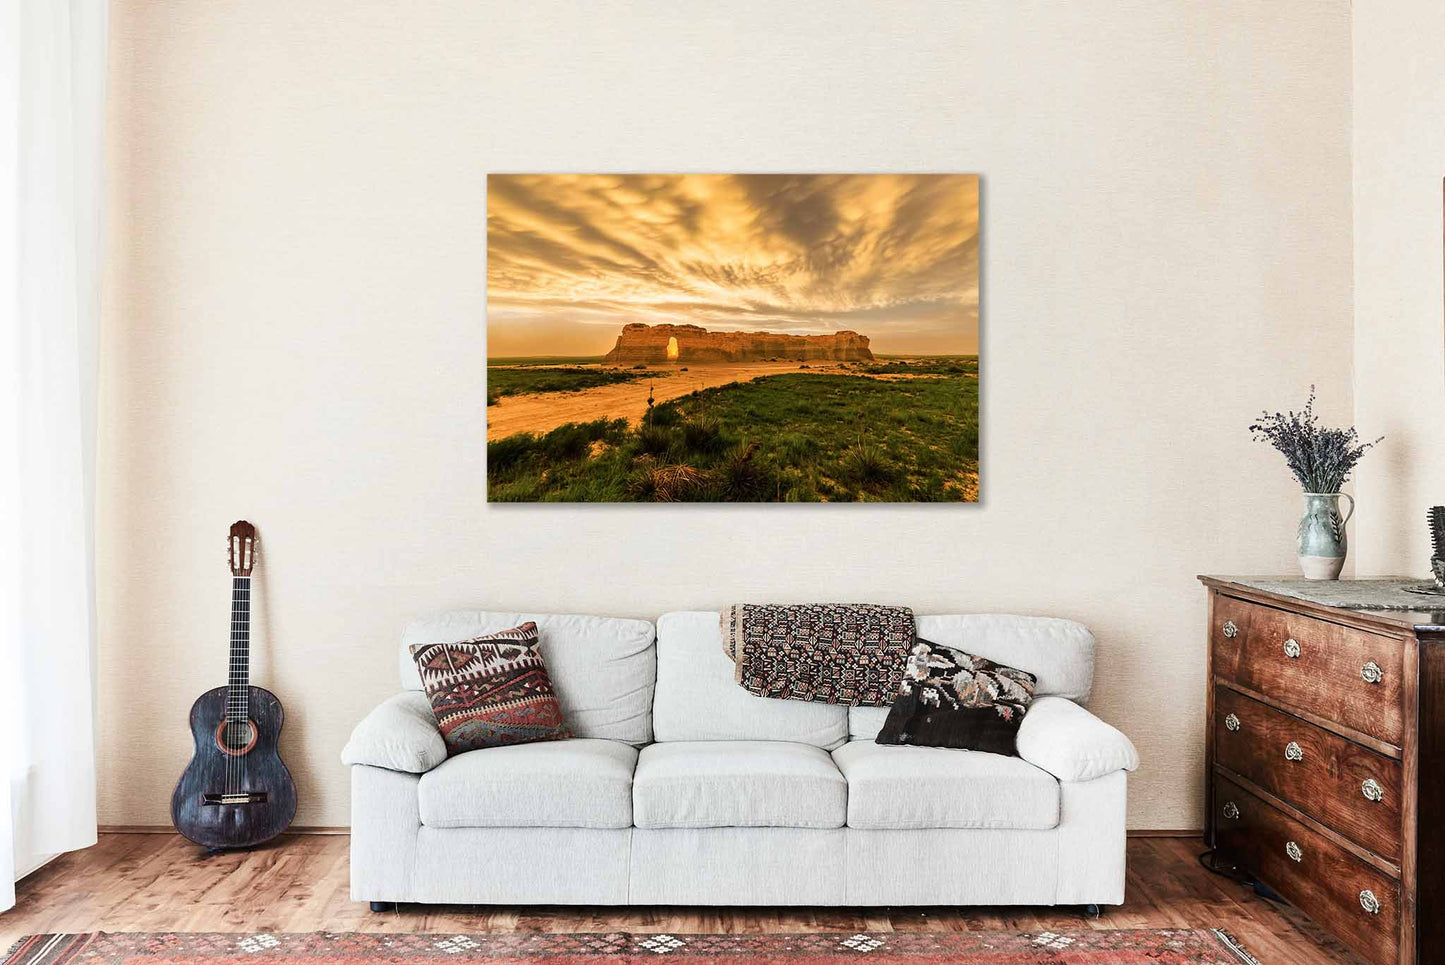 Great Plains Canvas Wall Art (Ready to Hang) Gallery Wrap of Monument Rocks Under Stormy Sky at Sunset in Kansas Prairie Photography Western Decor